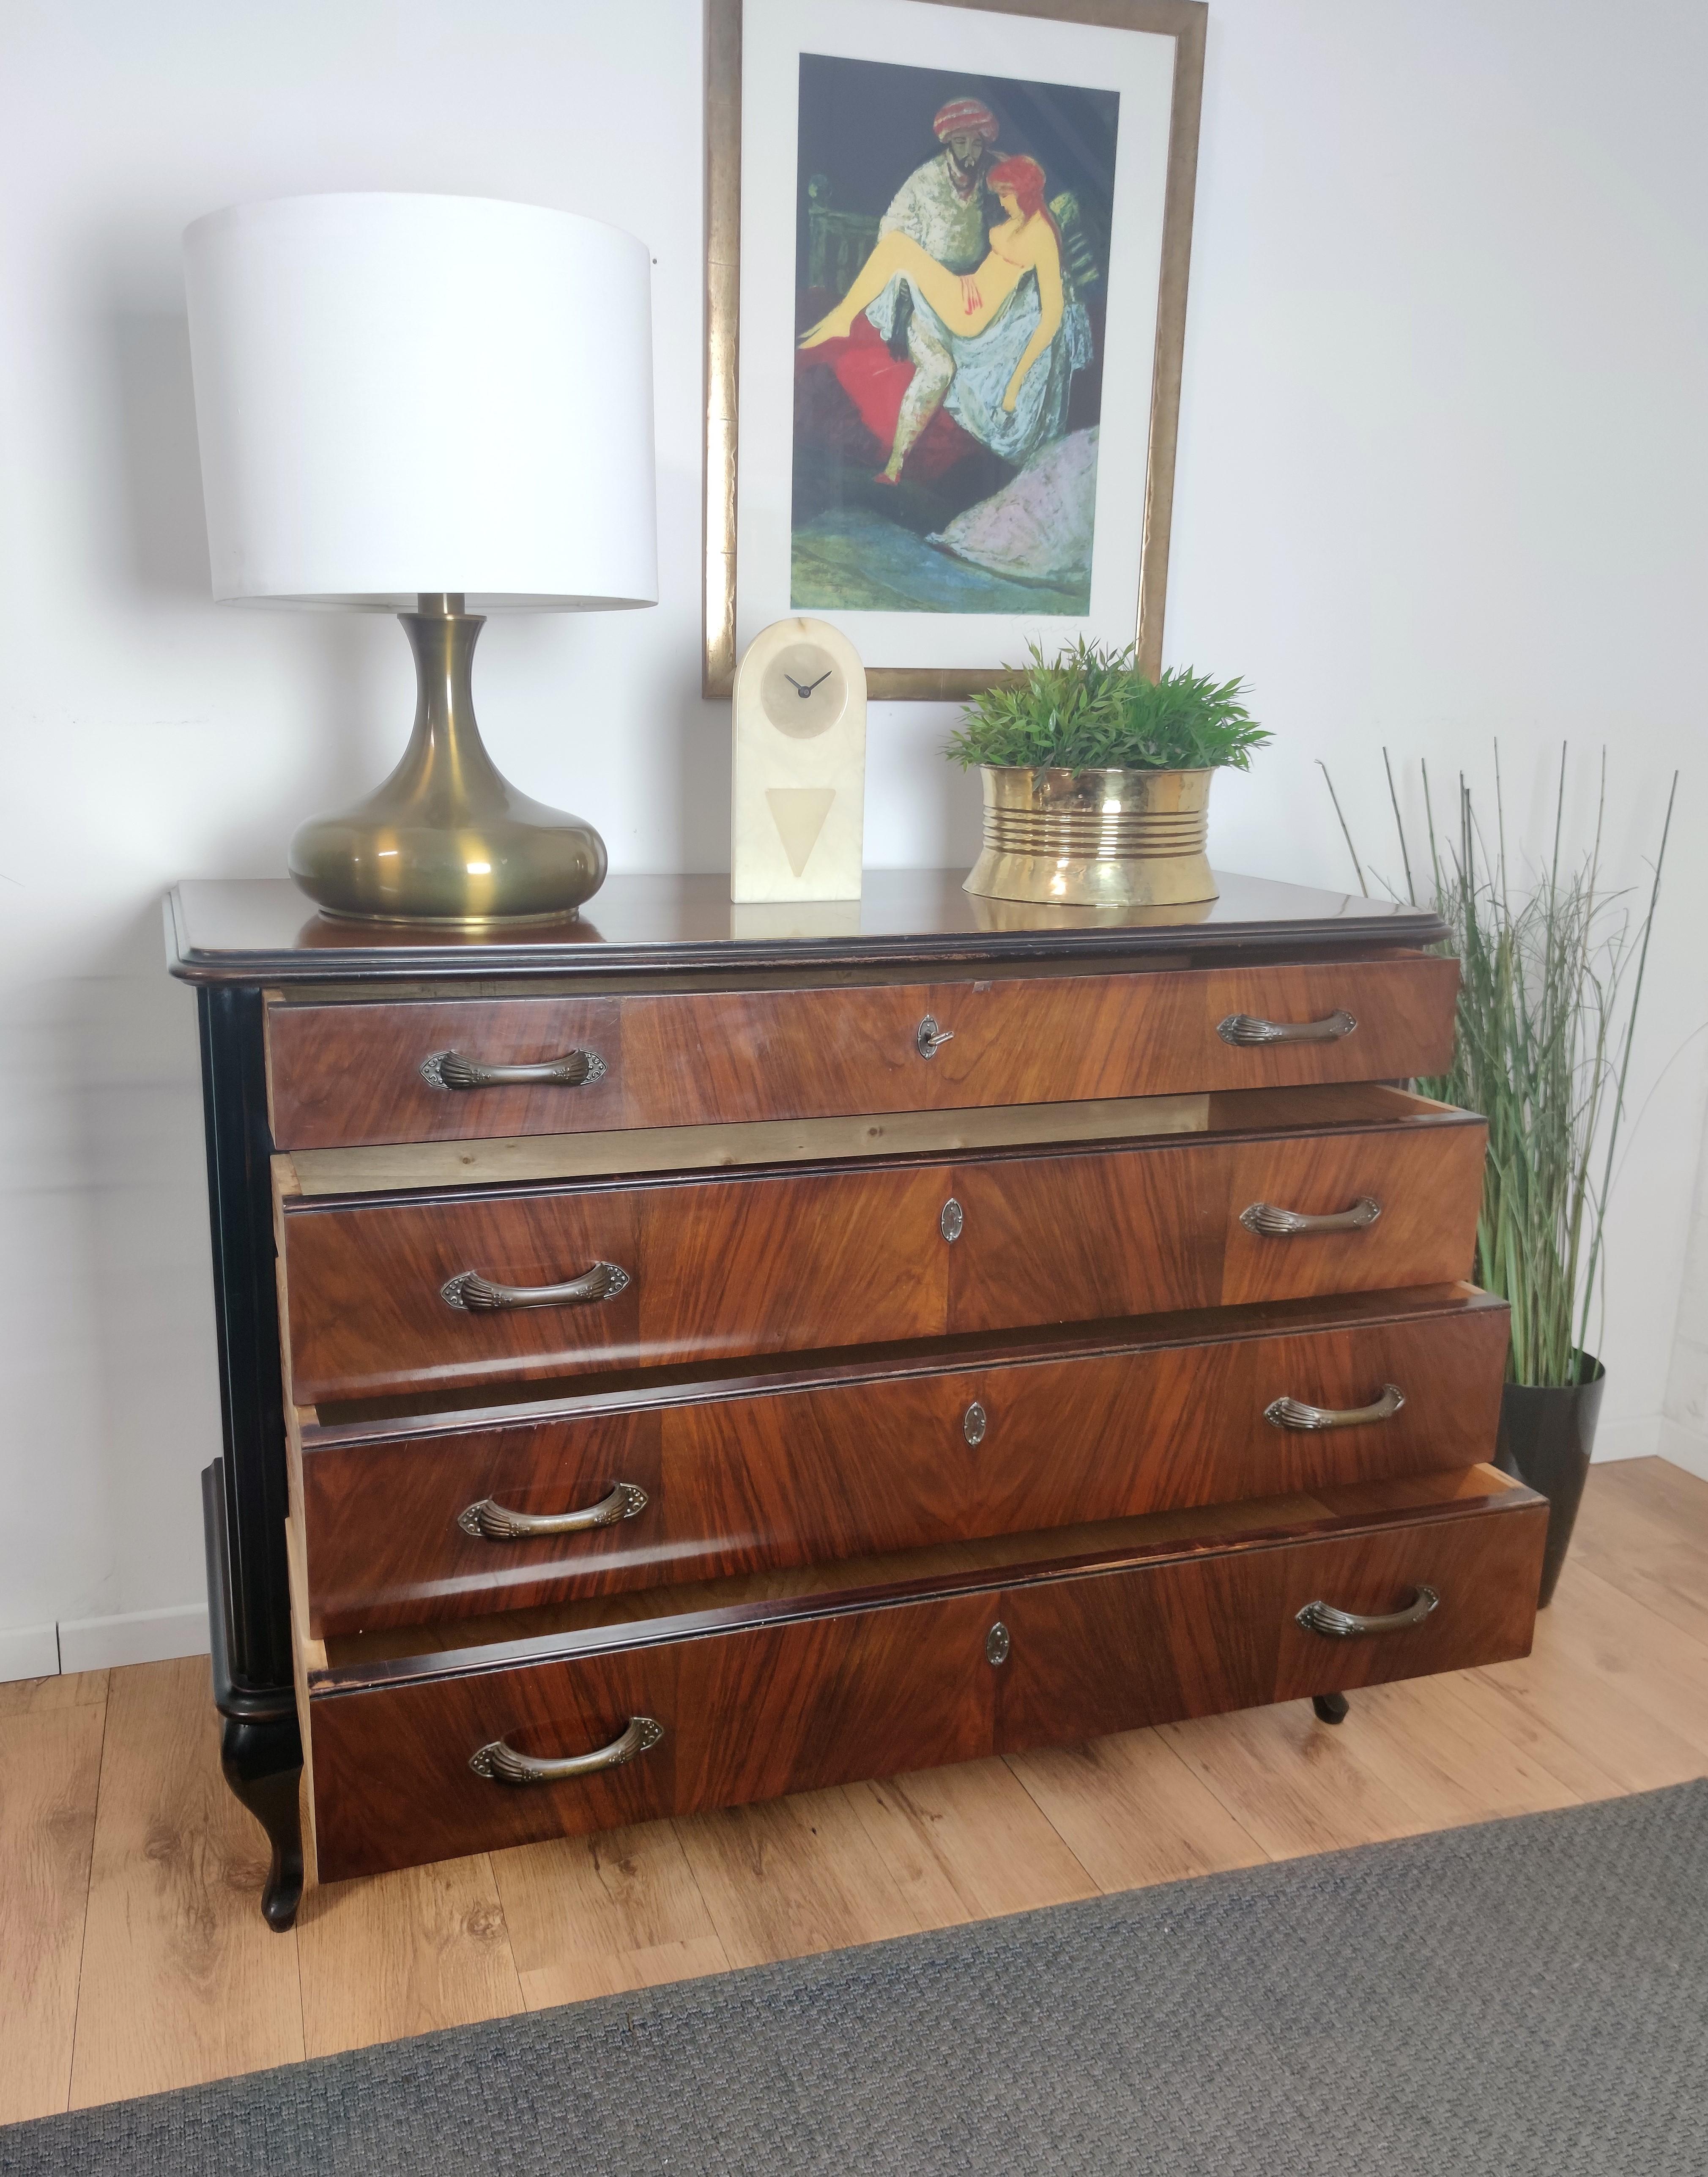 Italian Mid-Century Modern Wood and Brass Commode Dresser Chest of 4 Drawers In Good Condition For Sale In Carimate, Como